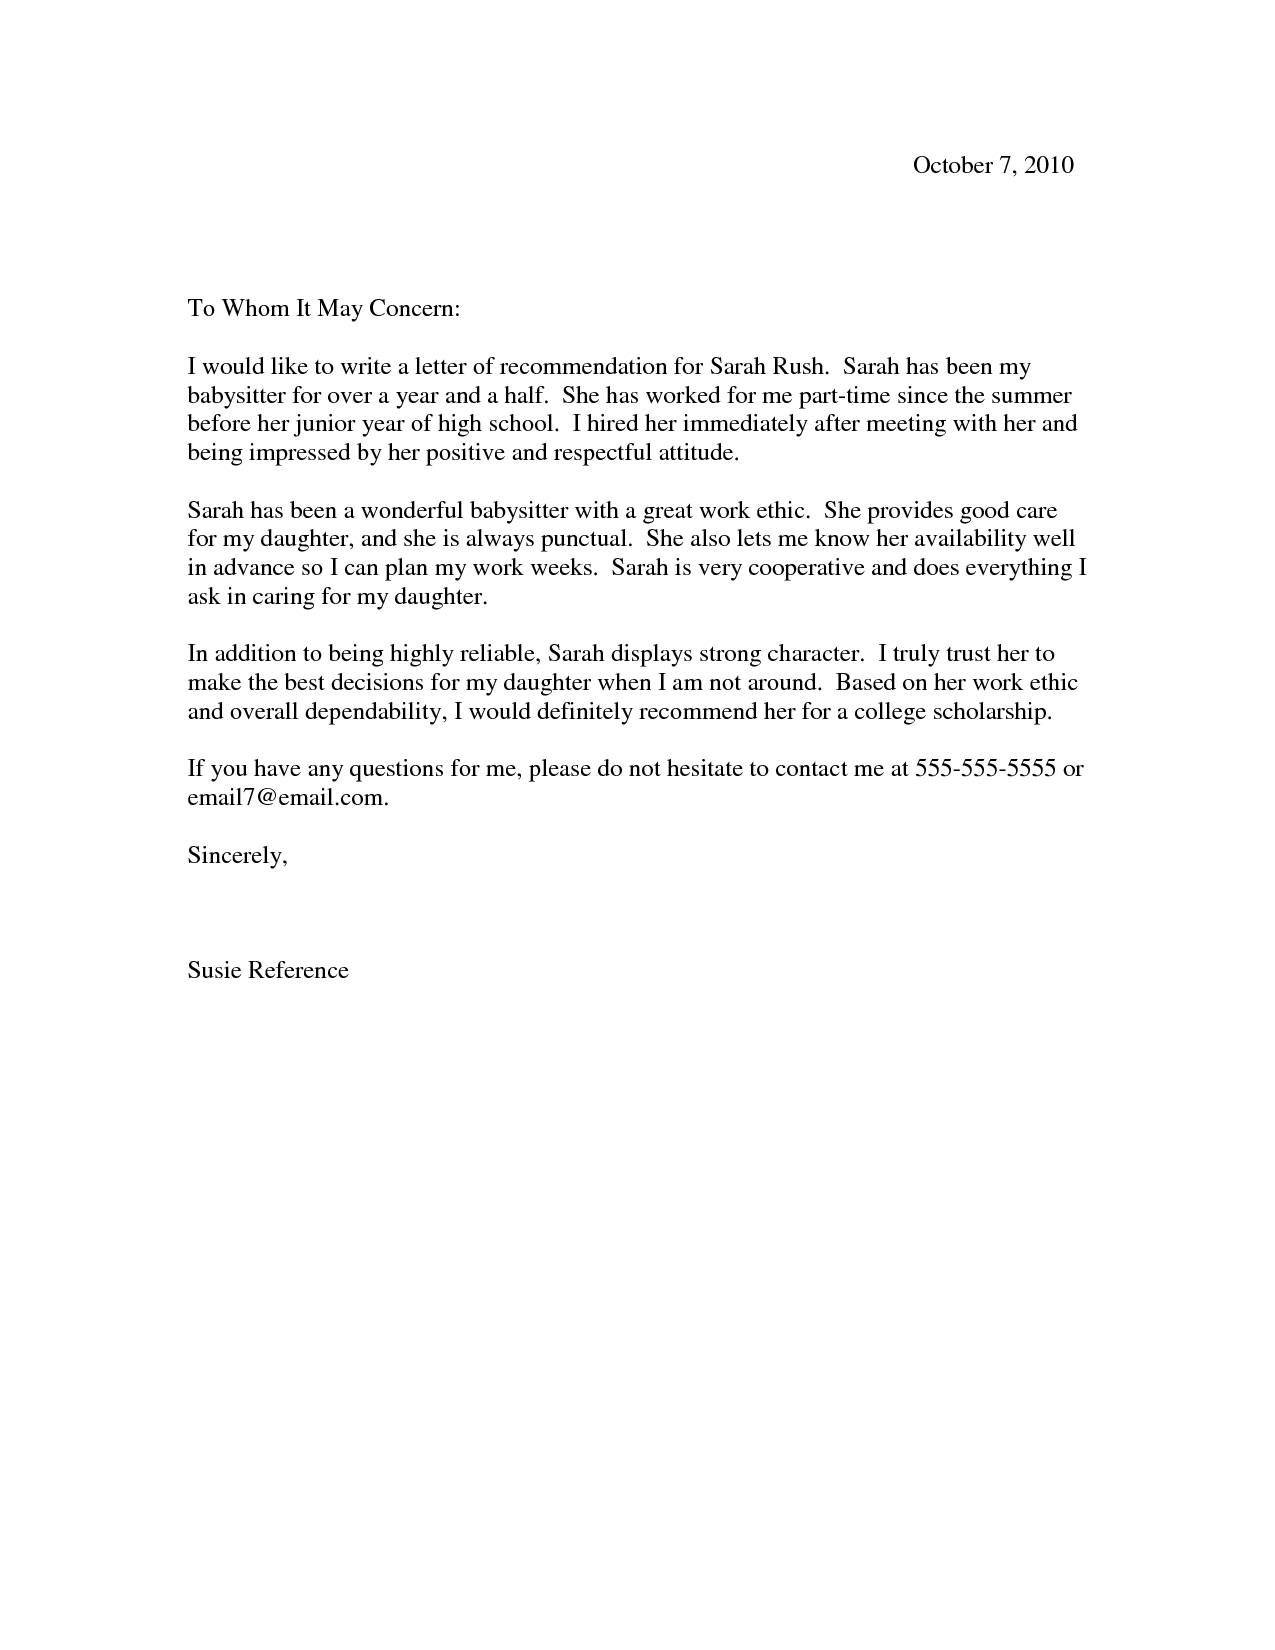 College Recommendation Letter Sample College within size 1275 X 1650